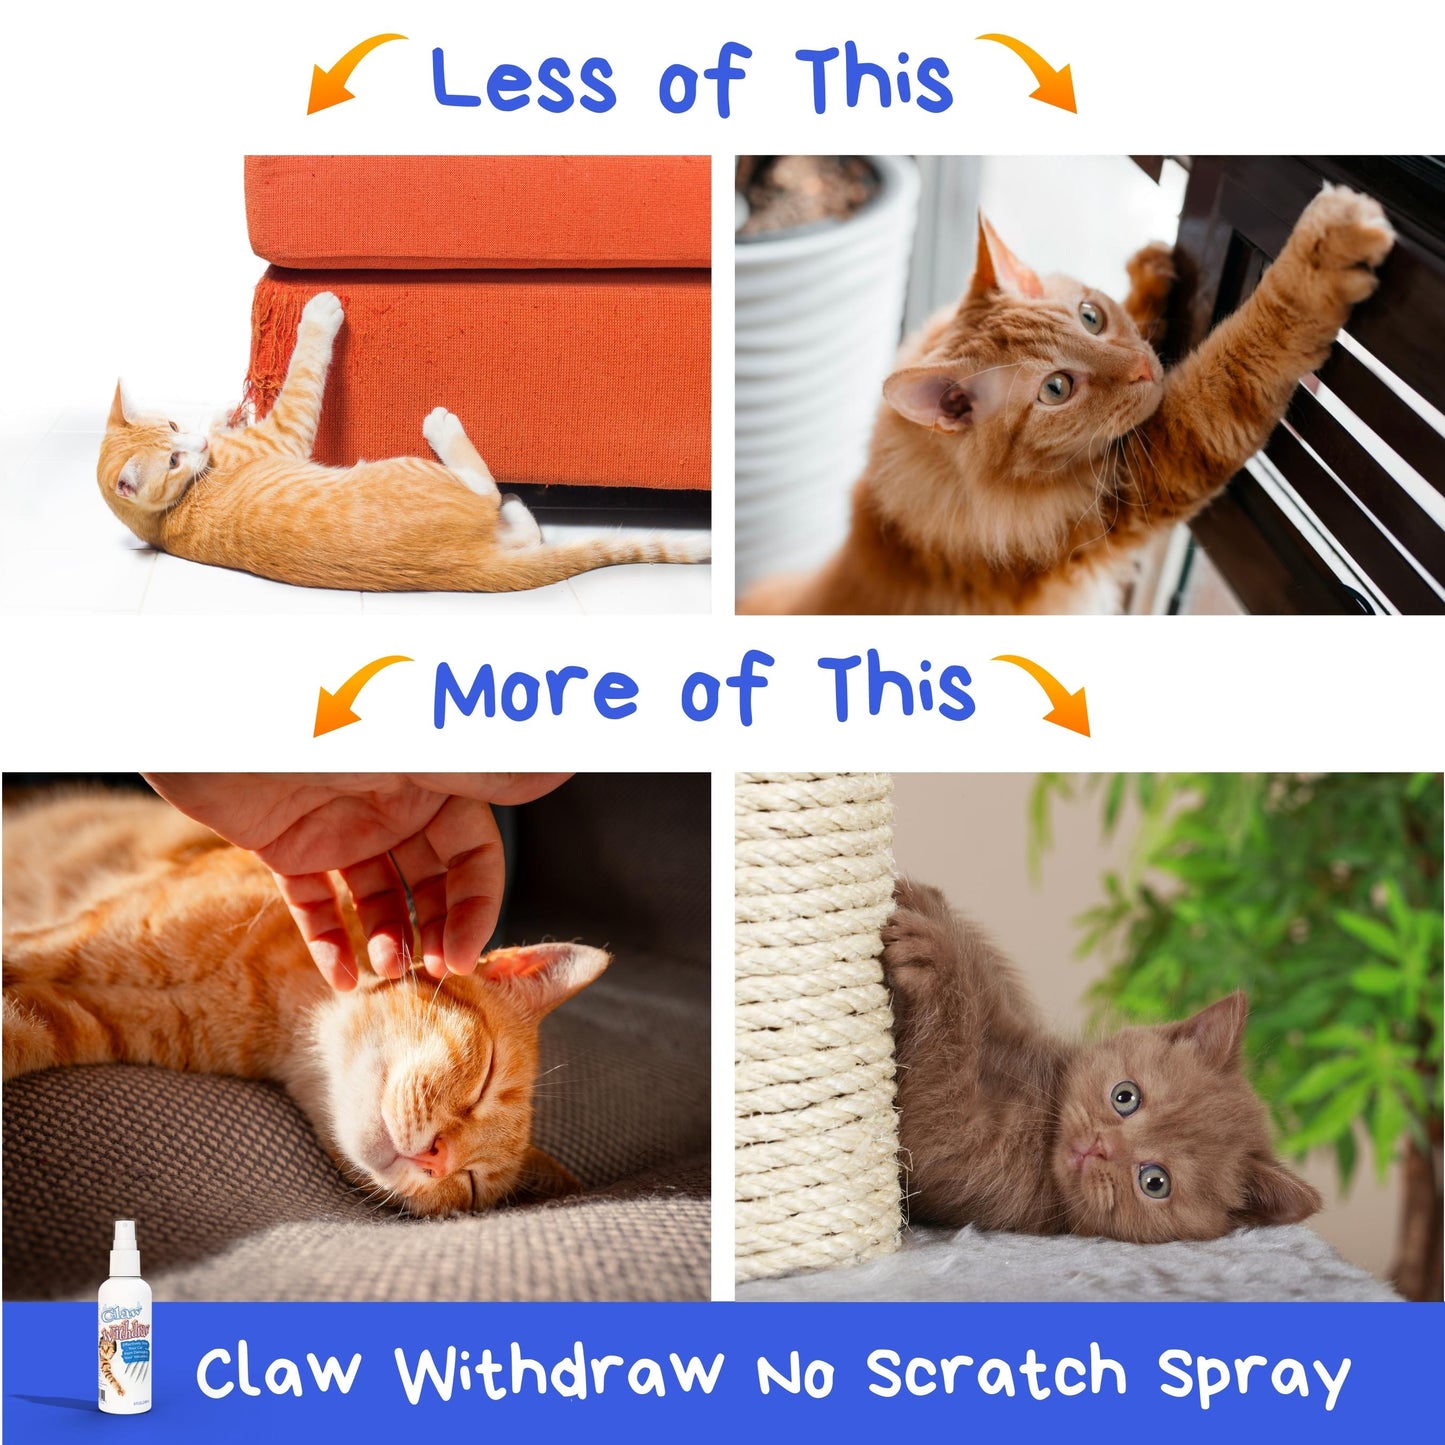 Claw Withdraw No Scratch Spray for Cats - Stop Cat Scratching with this Natural Cat Deterrent For Furniture, Carpets, Drapes, Leather, Fabric and More - 8 oz